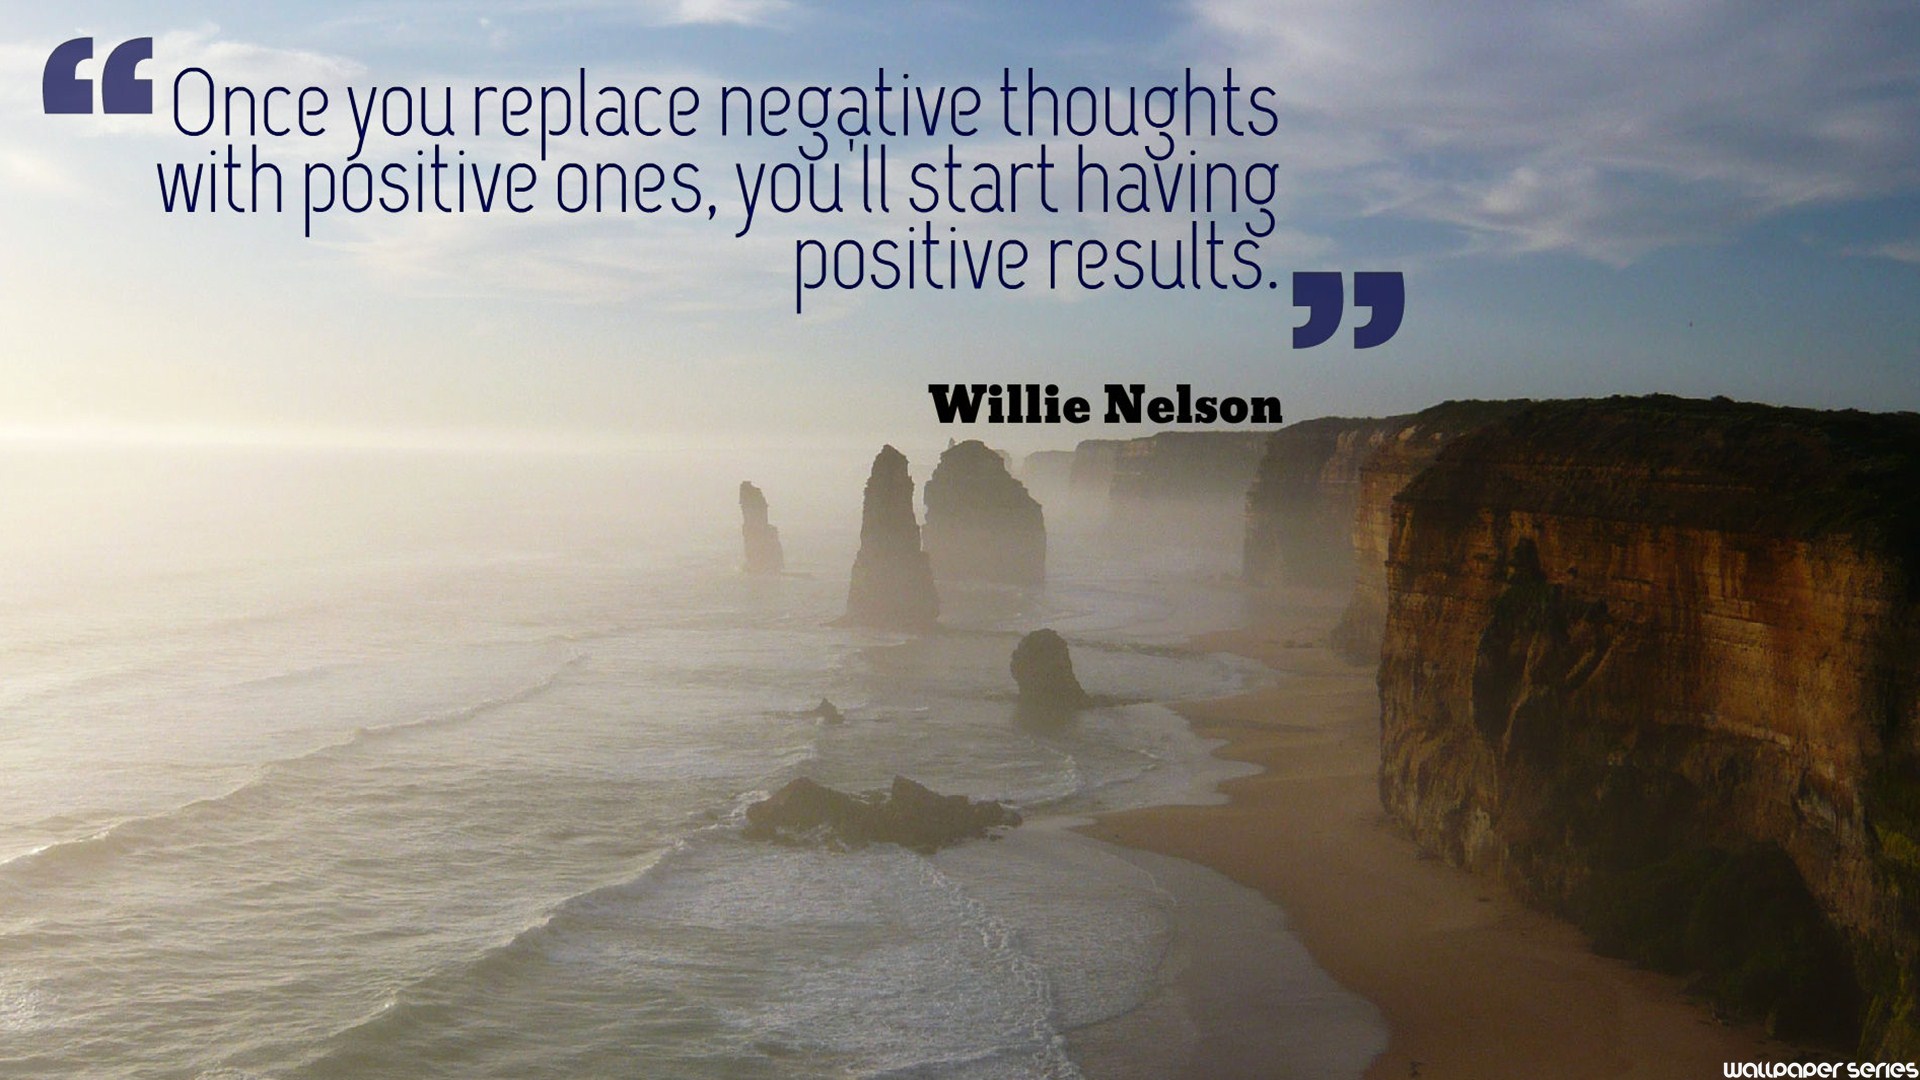 Negative To Positive Thoughts Quotes Wallpaper - Positive Thoughts - HD Wallpaper 